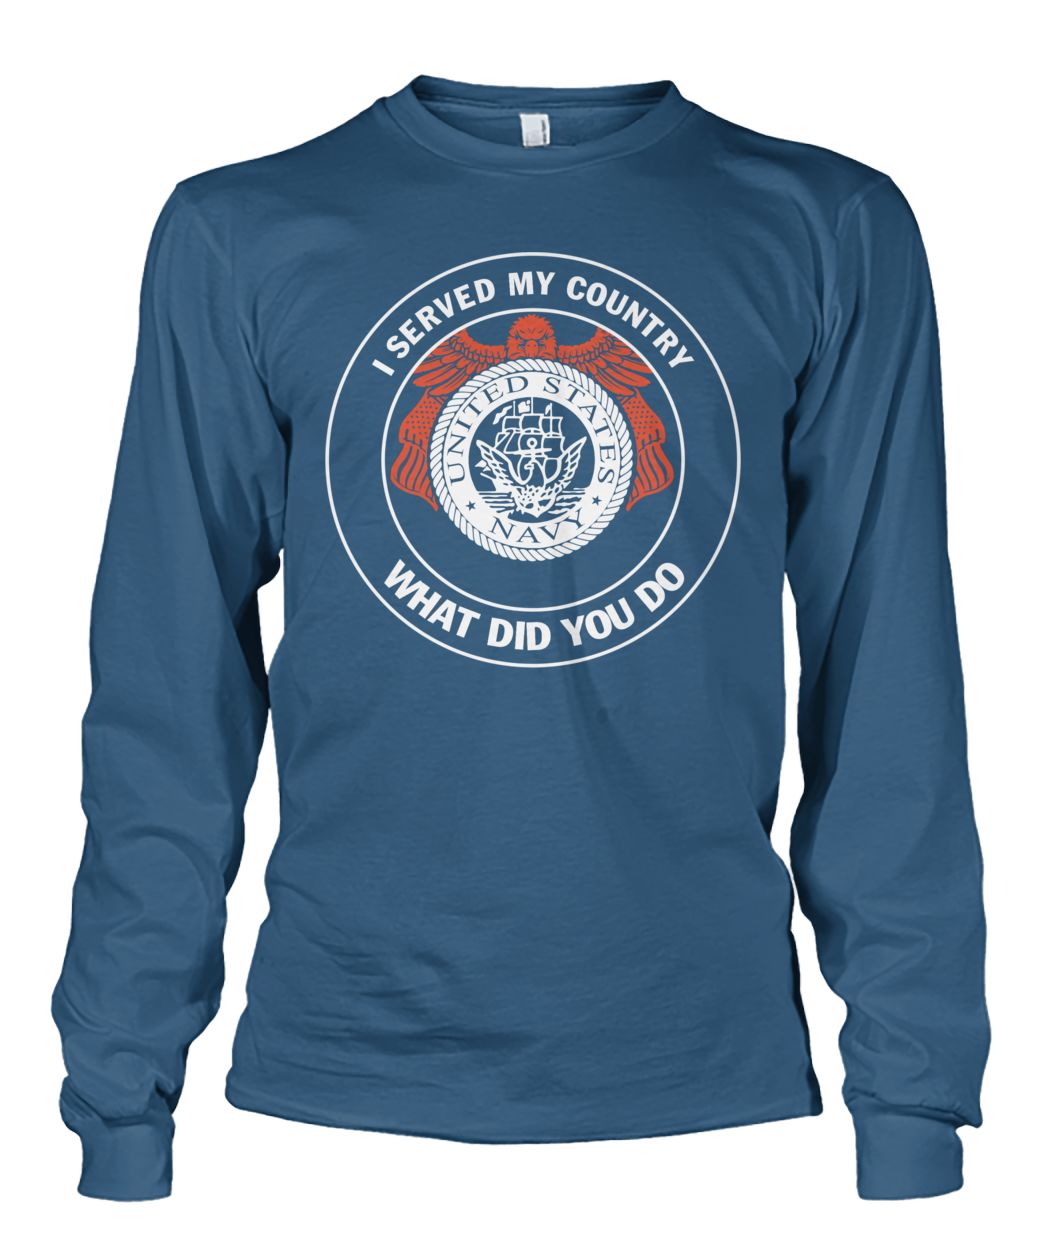 I served my country united states navy what did you do unisex long sleeve